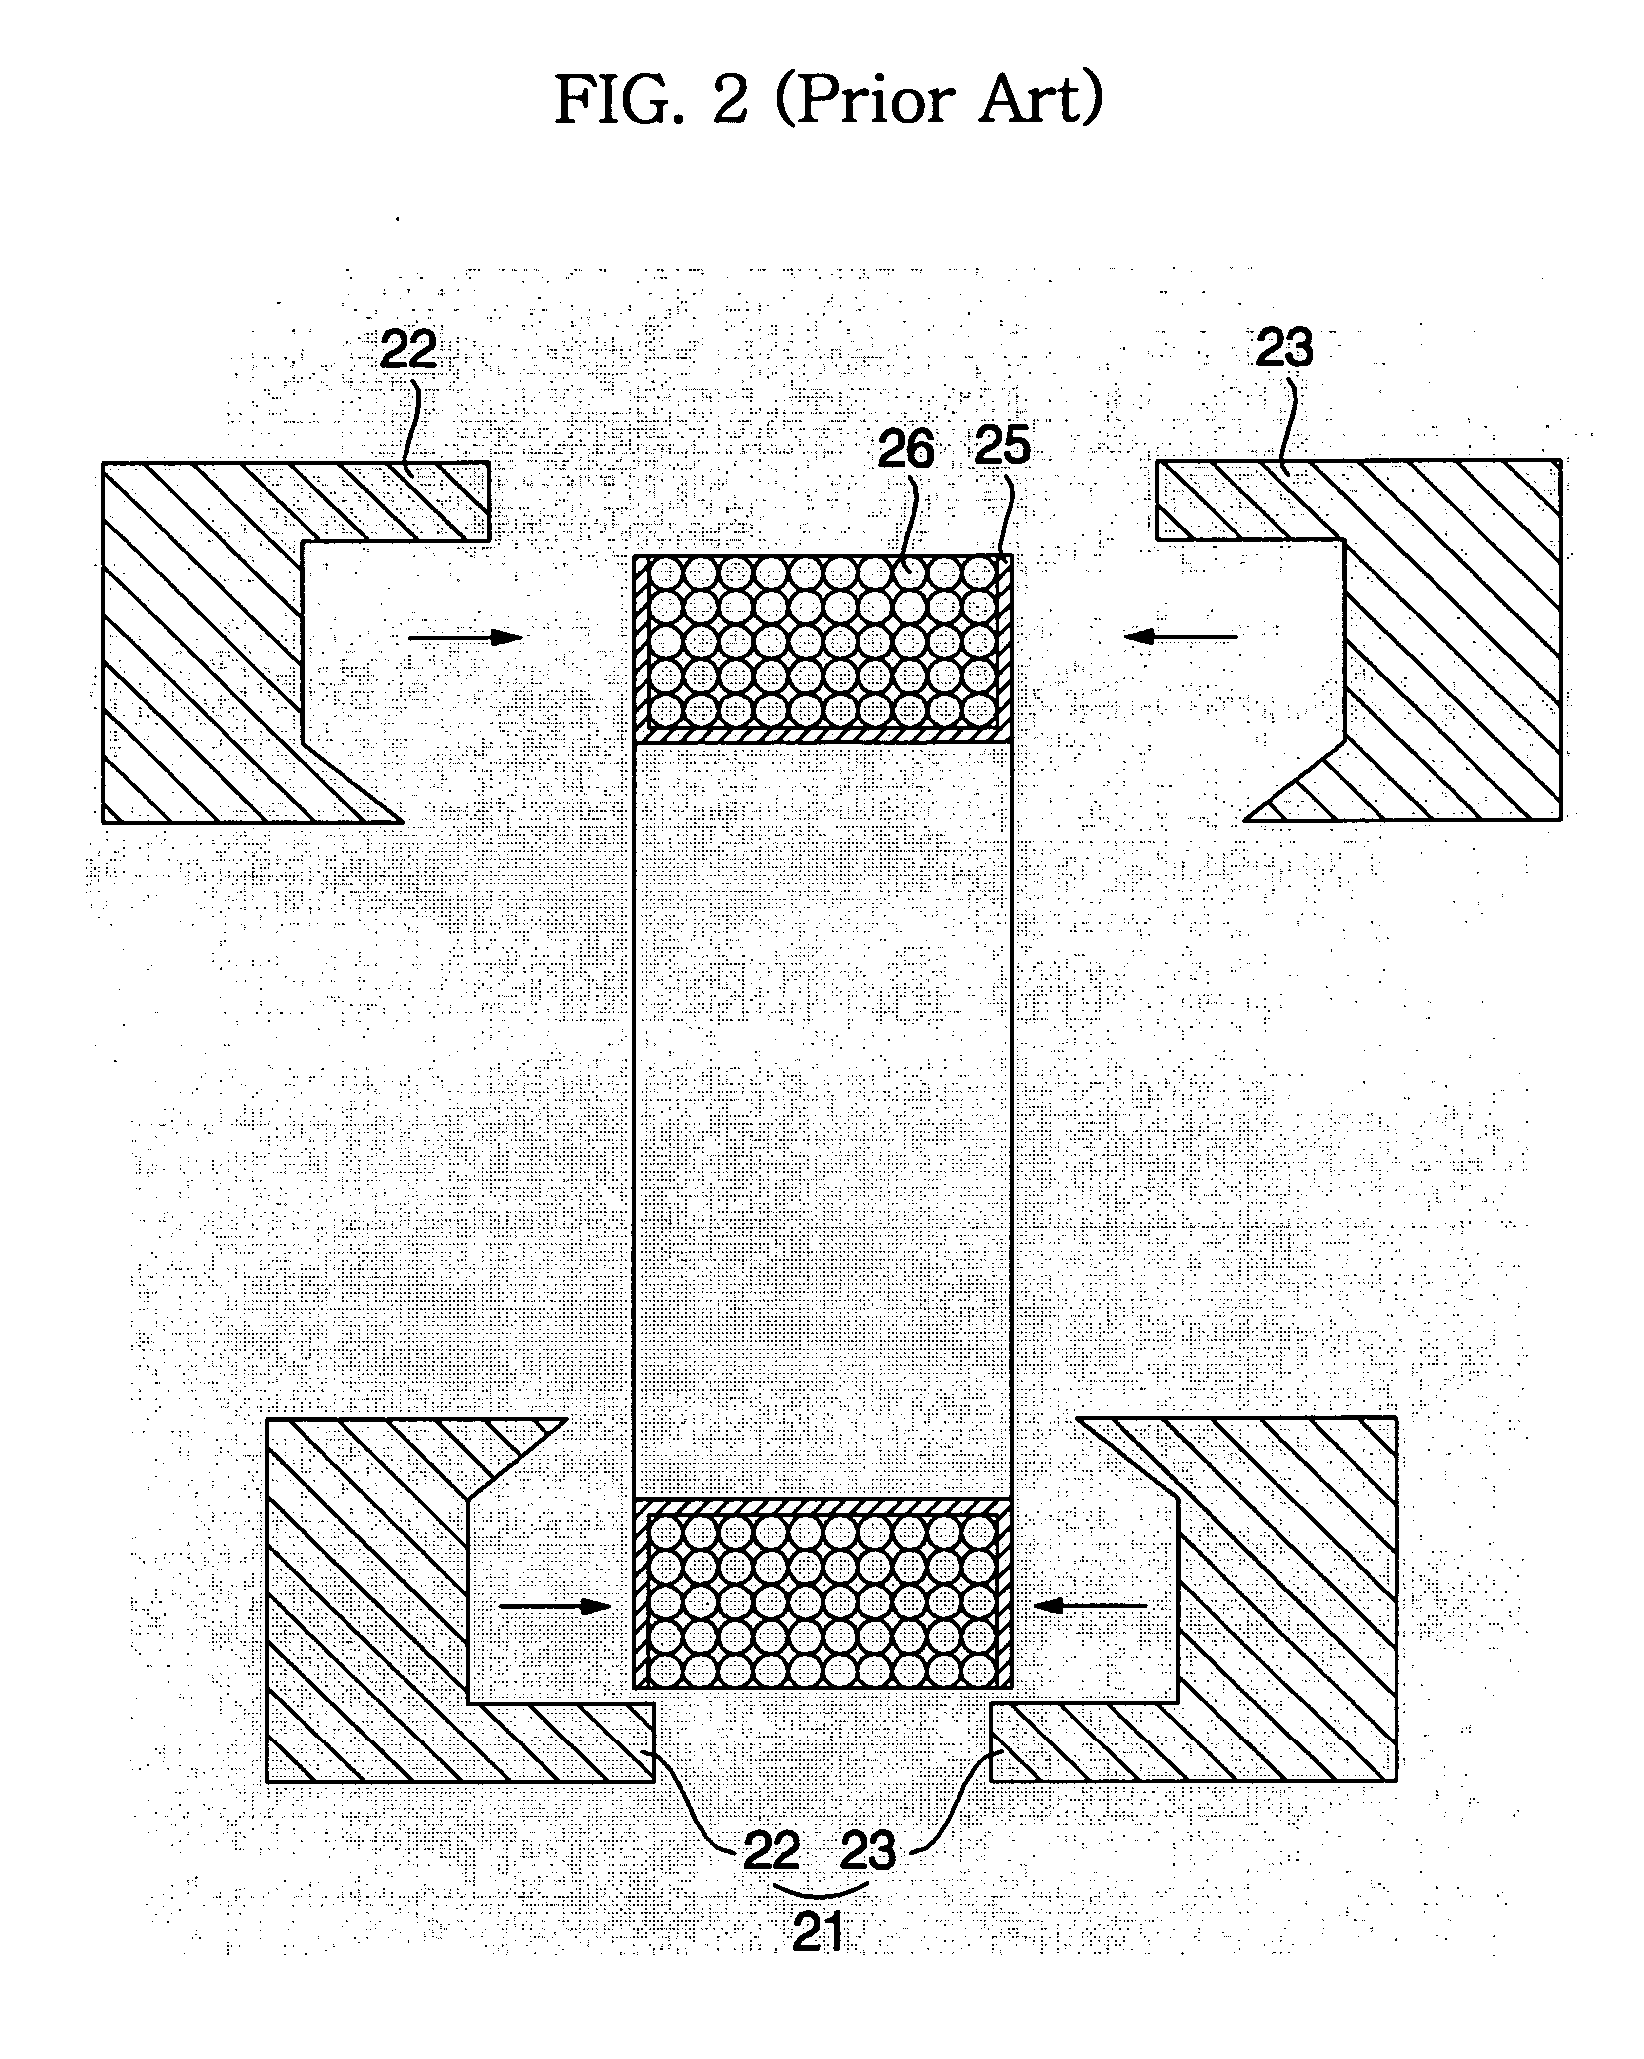 Outer core assembly structure of linear motor